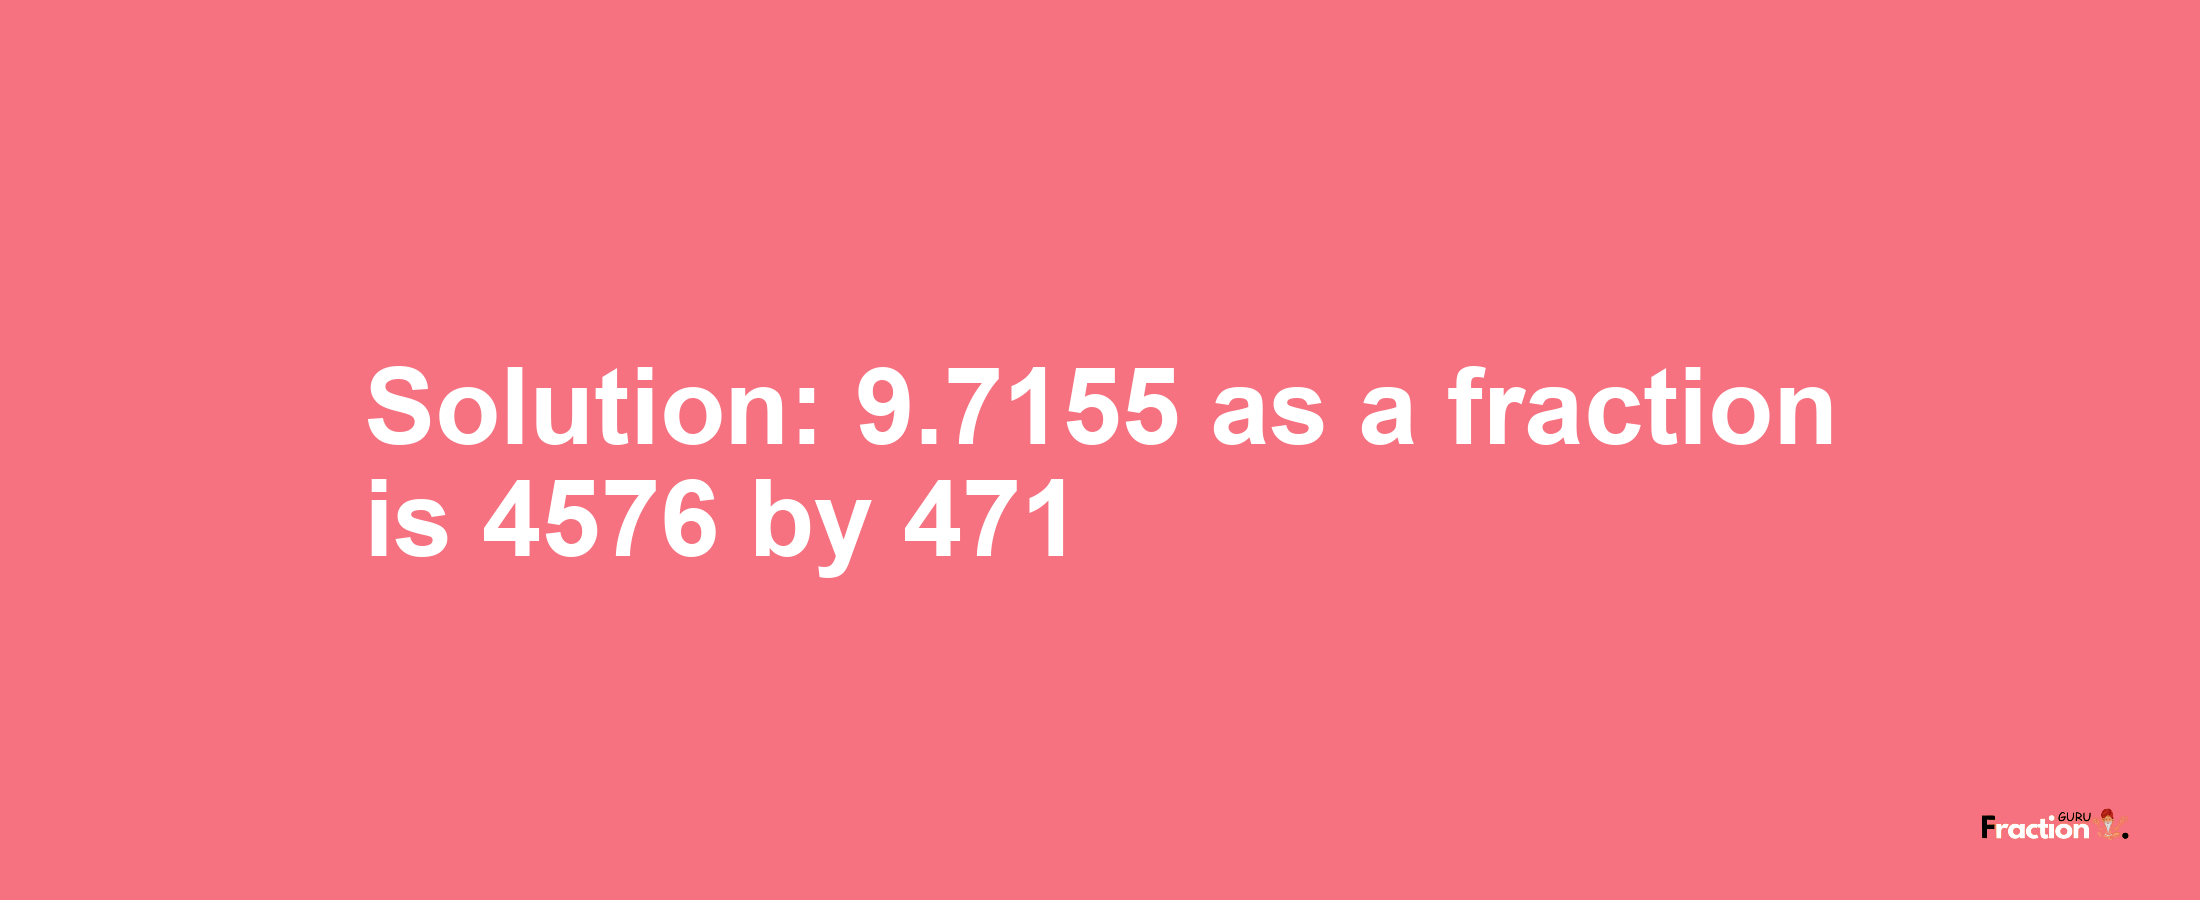 Solution:9.7155 as a fraction is 4576/471